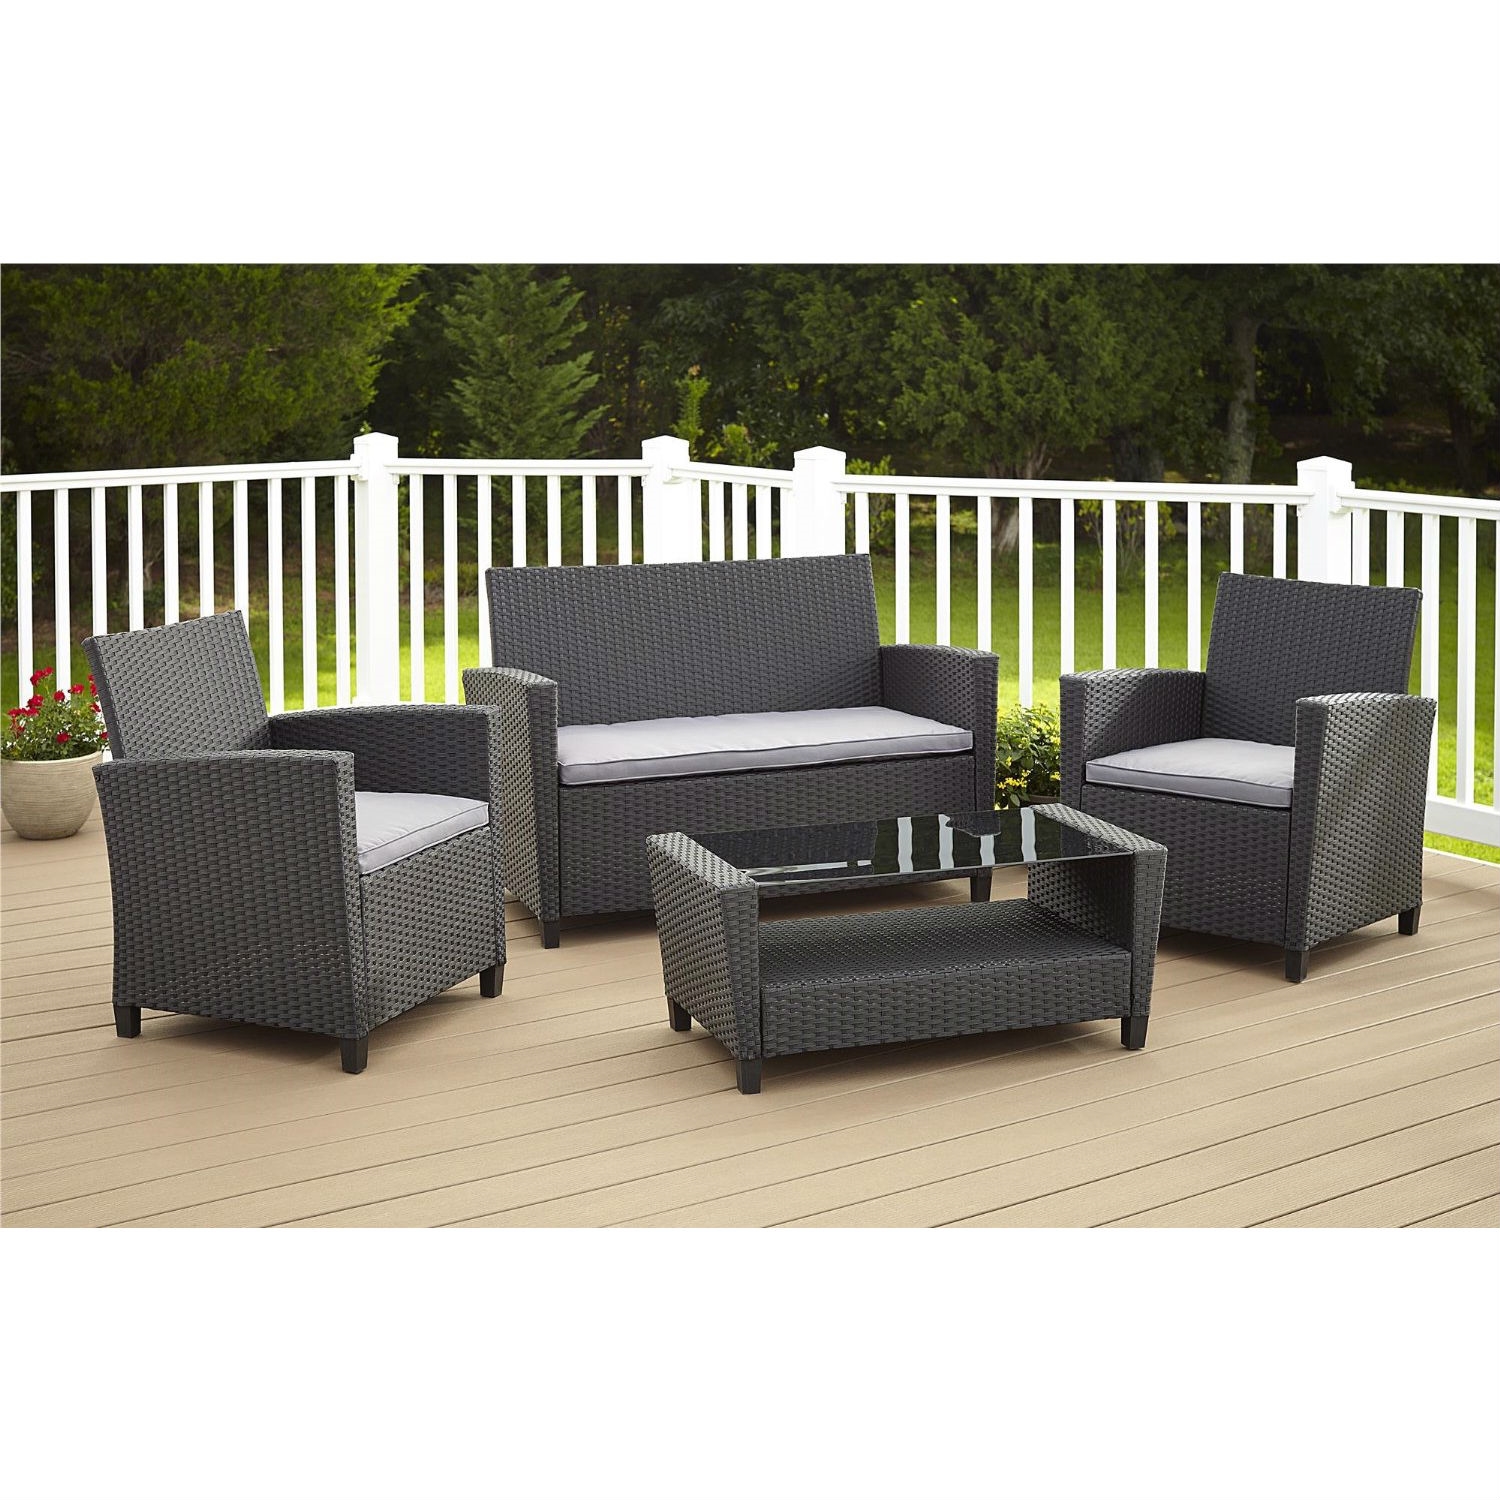 Trending 4-Piece Outdoor Patio Furniture Set in Grey Resin Wicker and Cushions grey resin wicker outdoor furniture